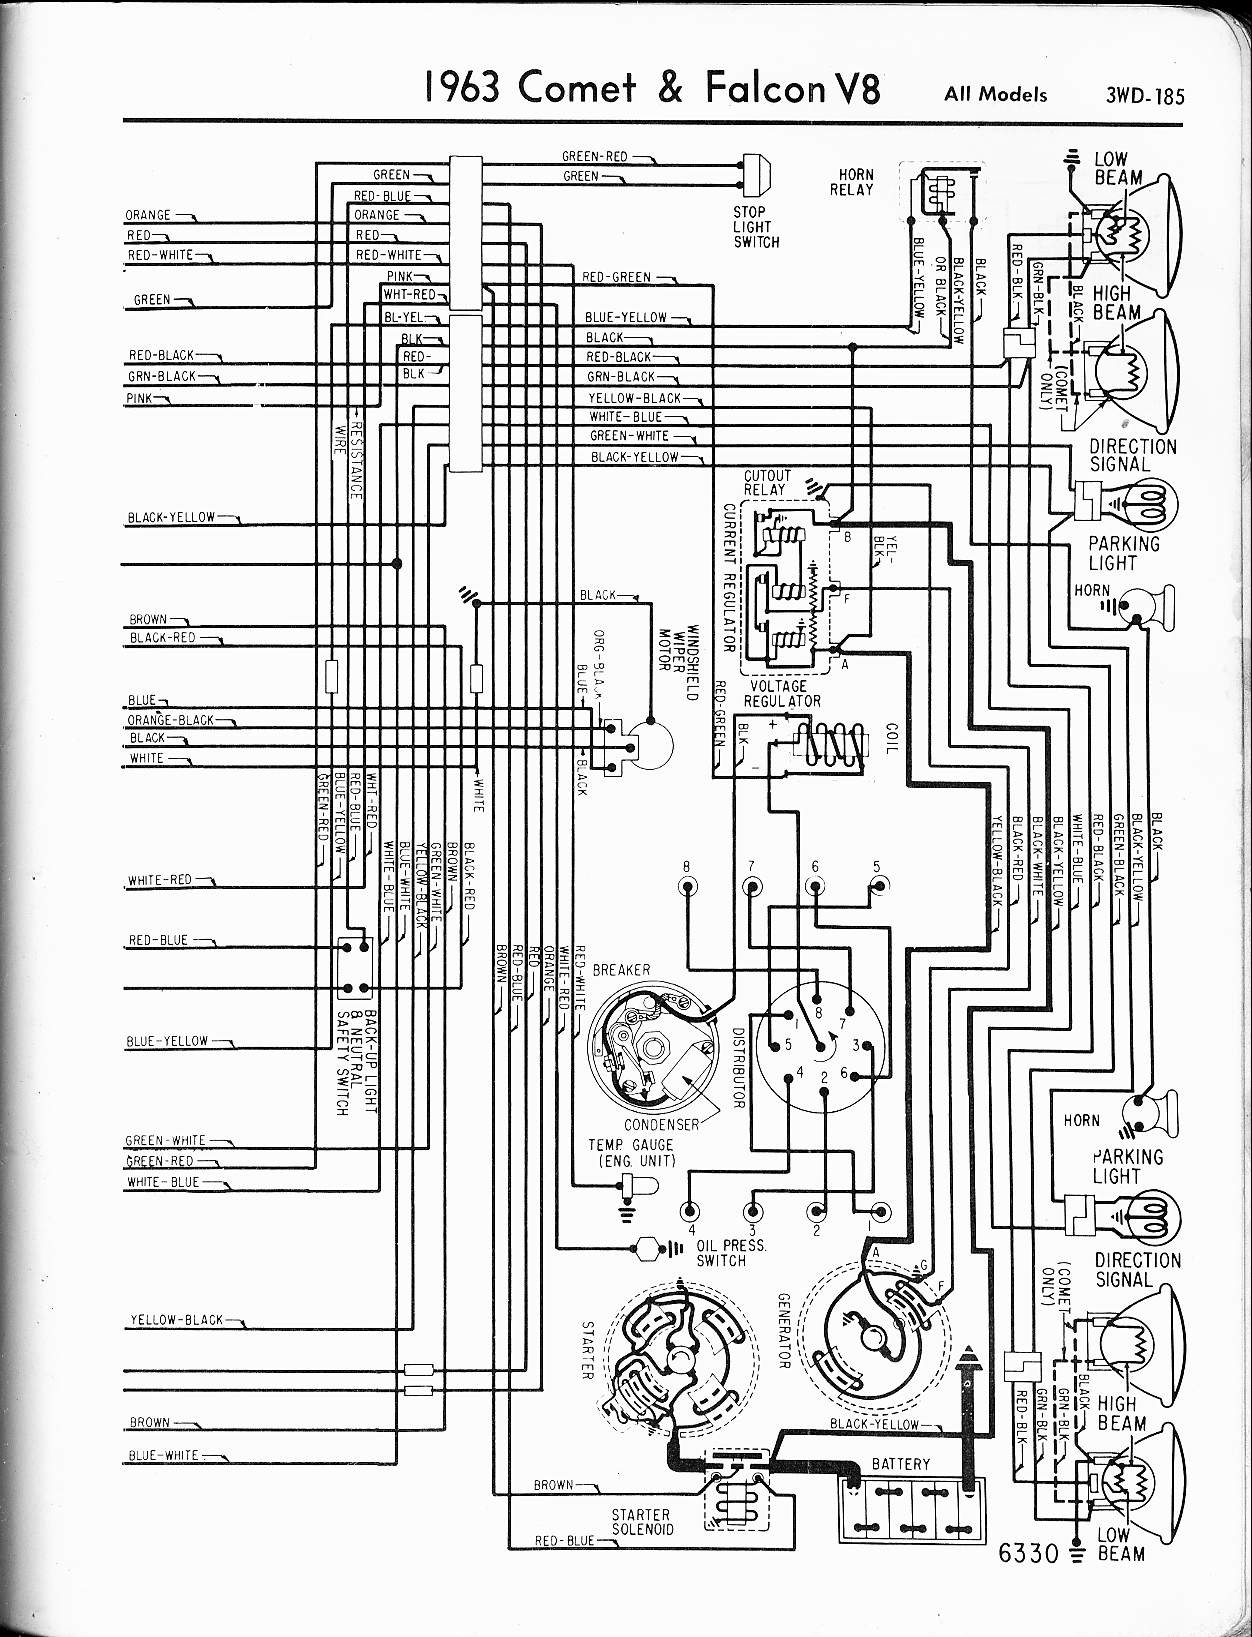 Ford 2000 Tractor Parts Diagram 57 65 ford Wiring Diagrams Of Ford 2000 Tractor Parts Diagram